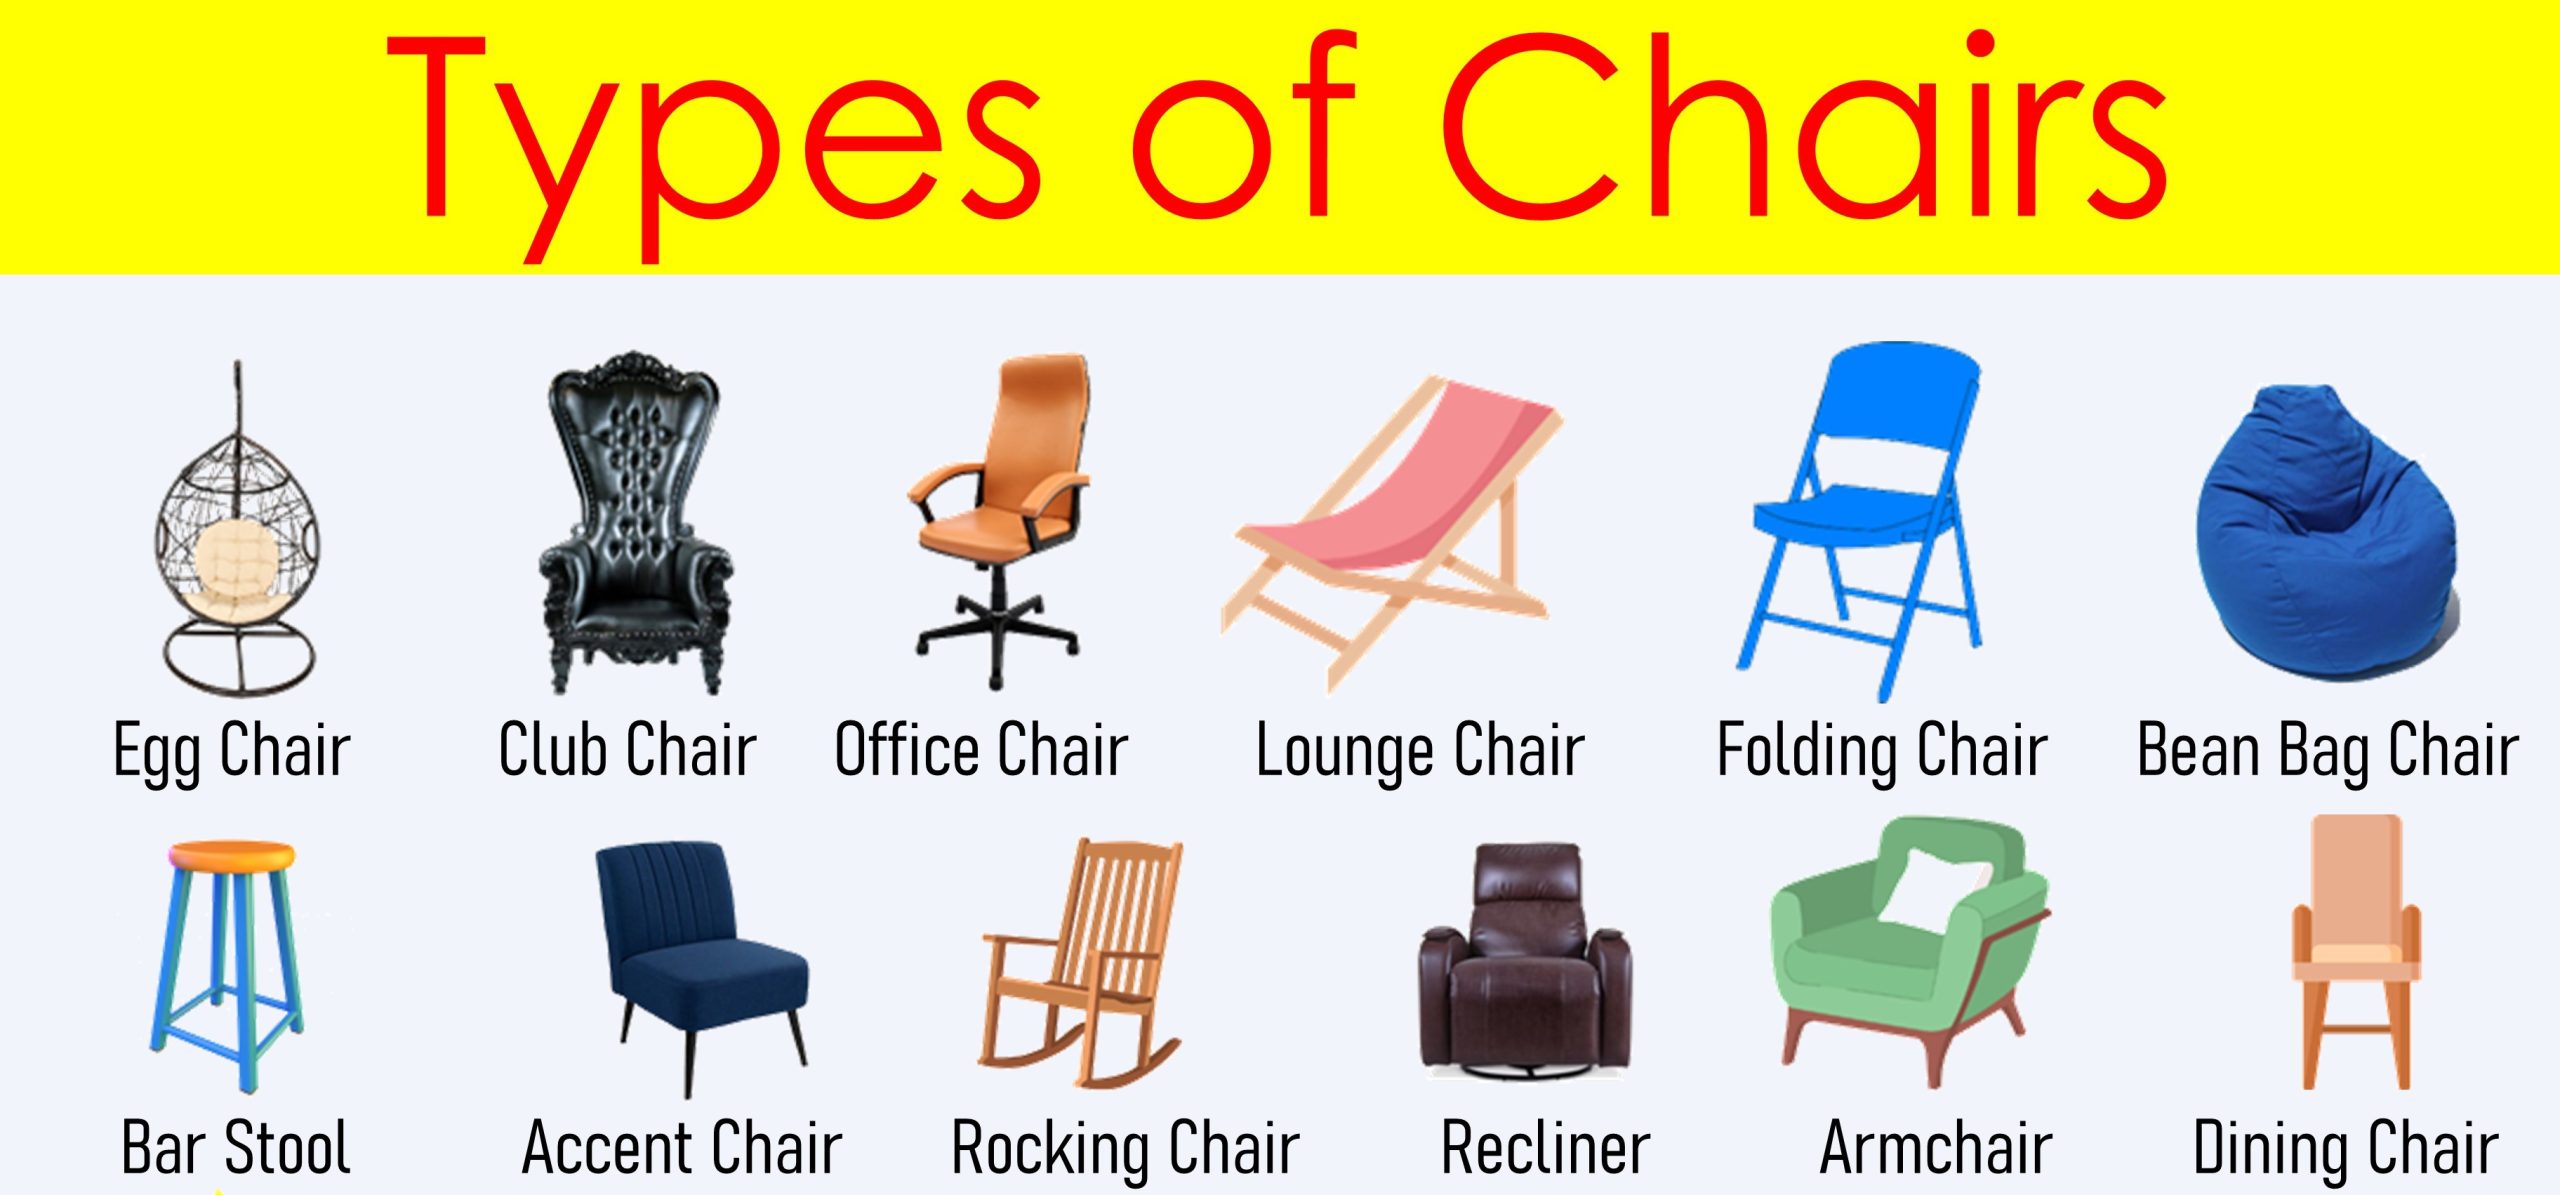 100+ Types of Chairs in English with Pictures | Types of Chairs